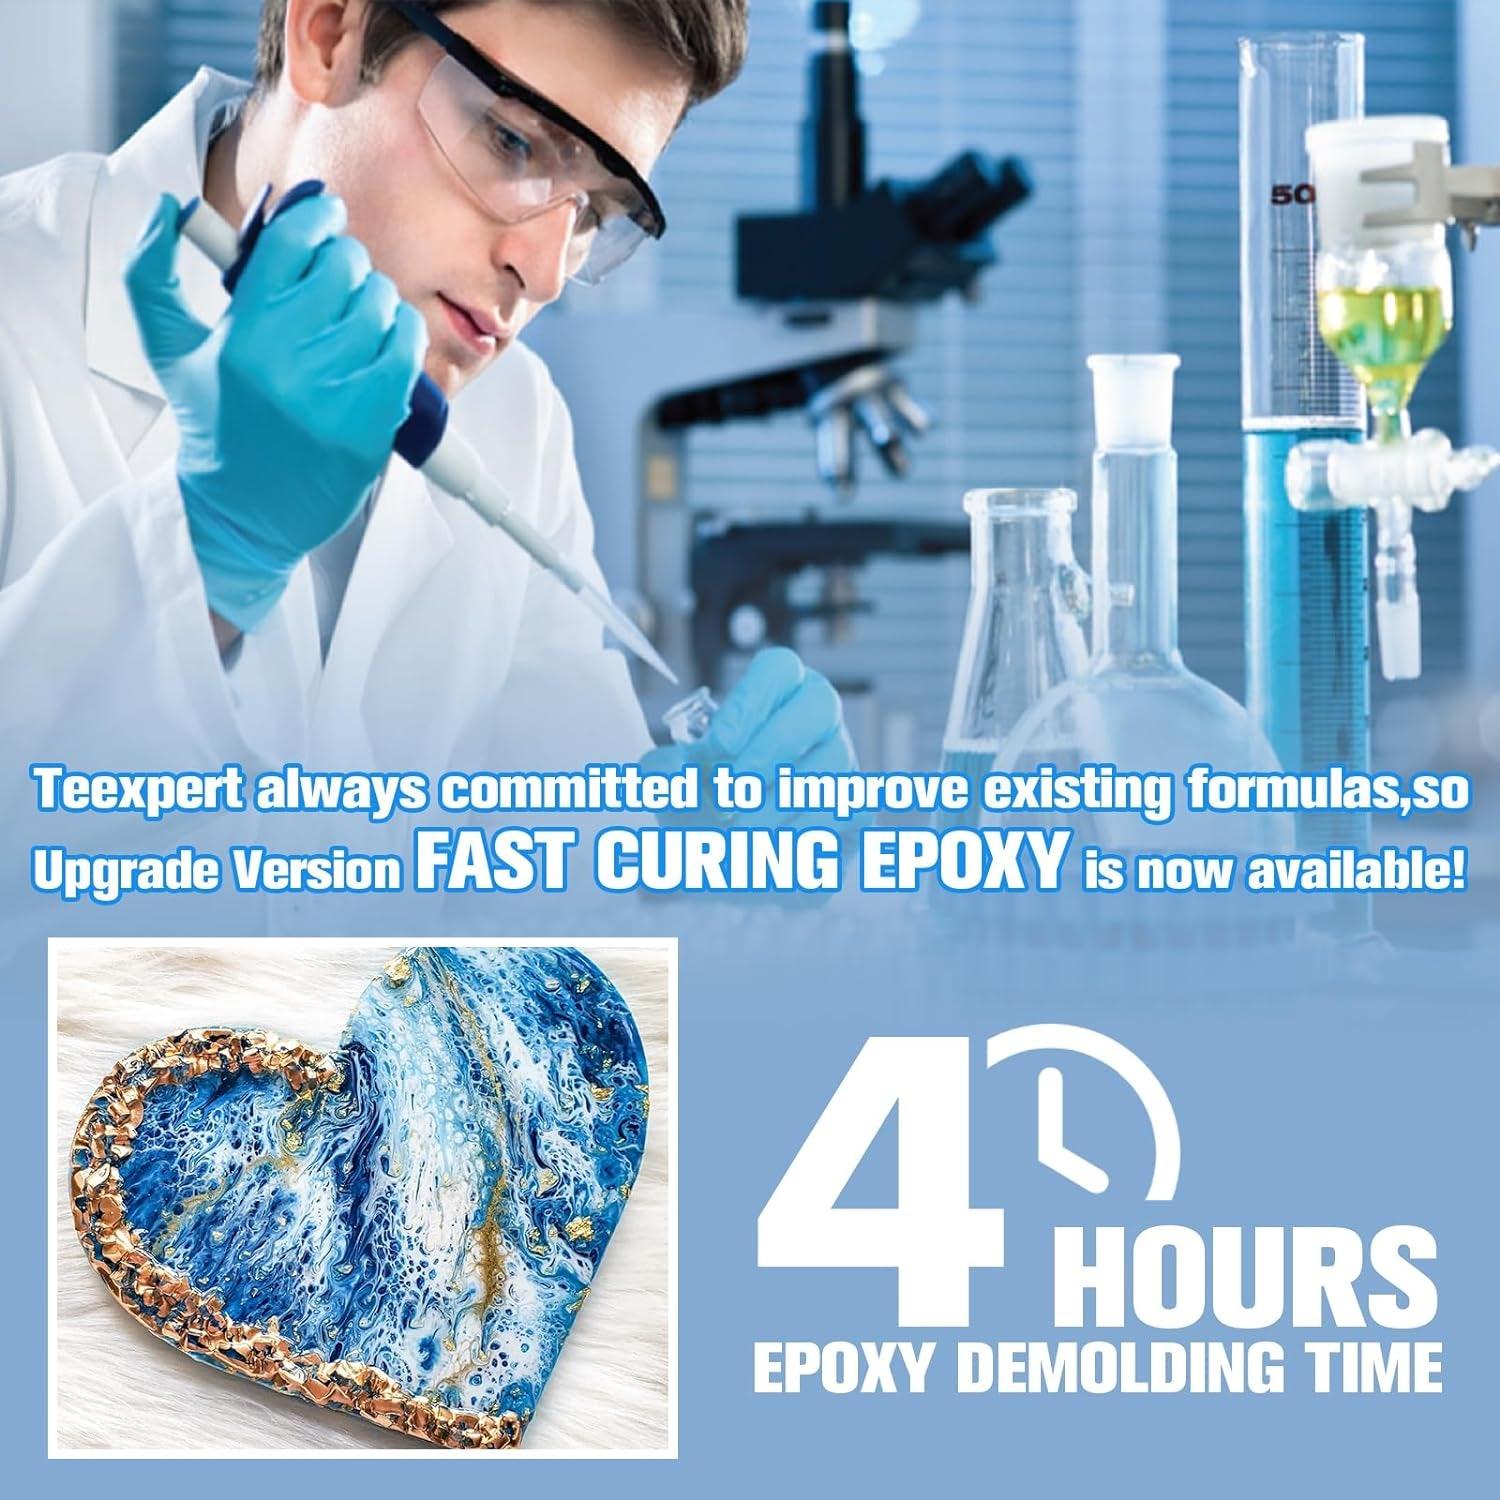 Epoxy Resin-76Oz Fast Curing Epoxy Resin 4 Hours Demold Crystal Clear & Self-Leveling Coating and Casting Resin 38OZ Resin and 38OZ Hardener Kit for DIY Art, Coasters,Jewelry,Wood,Resin Molds - WoodArtSupply